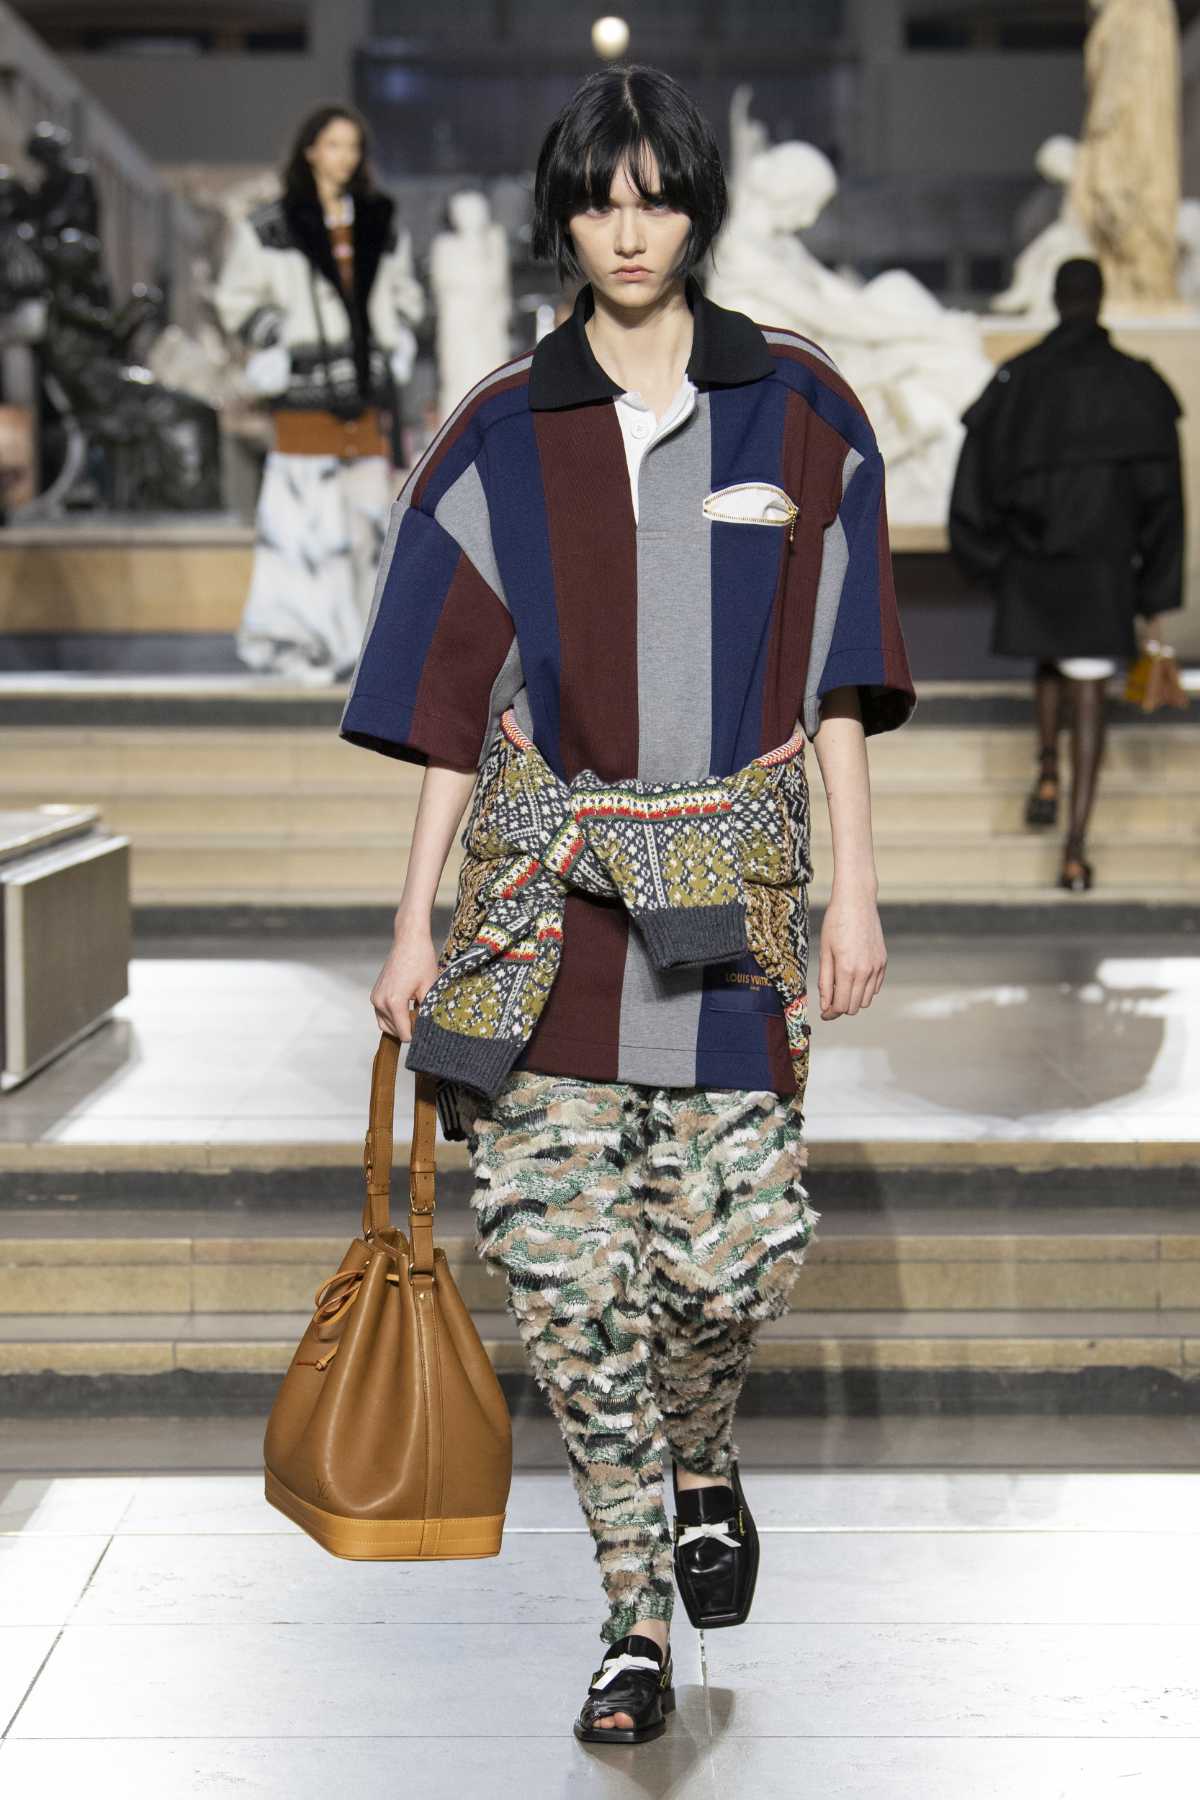 Louis Vuitton presented its stunning Fall 2022 collection